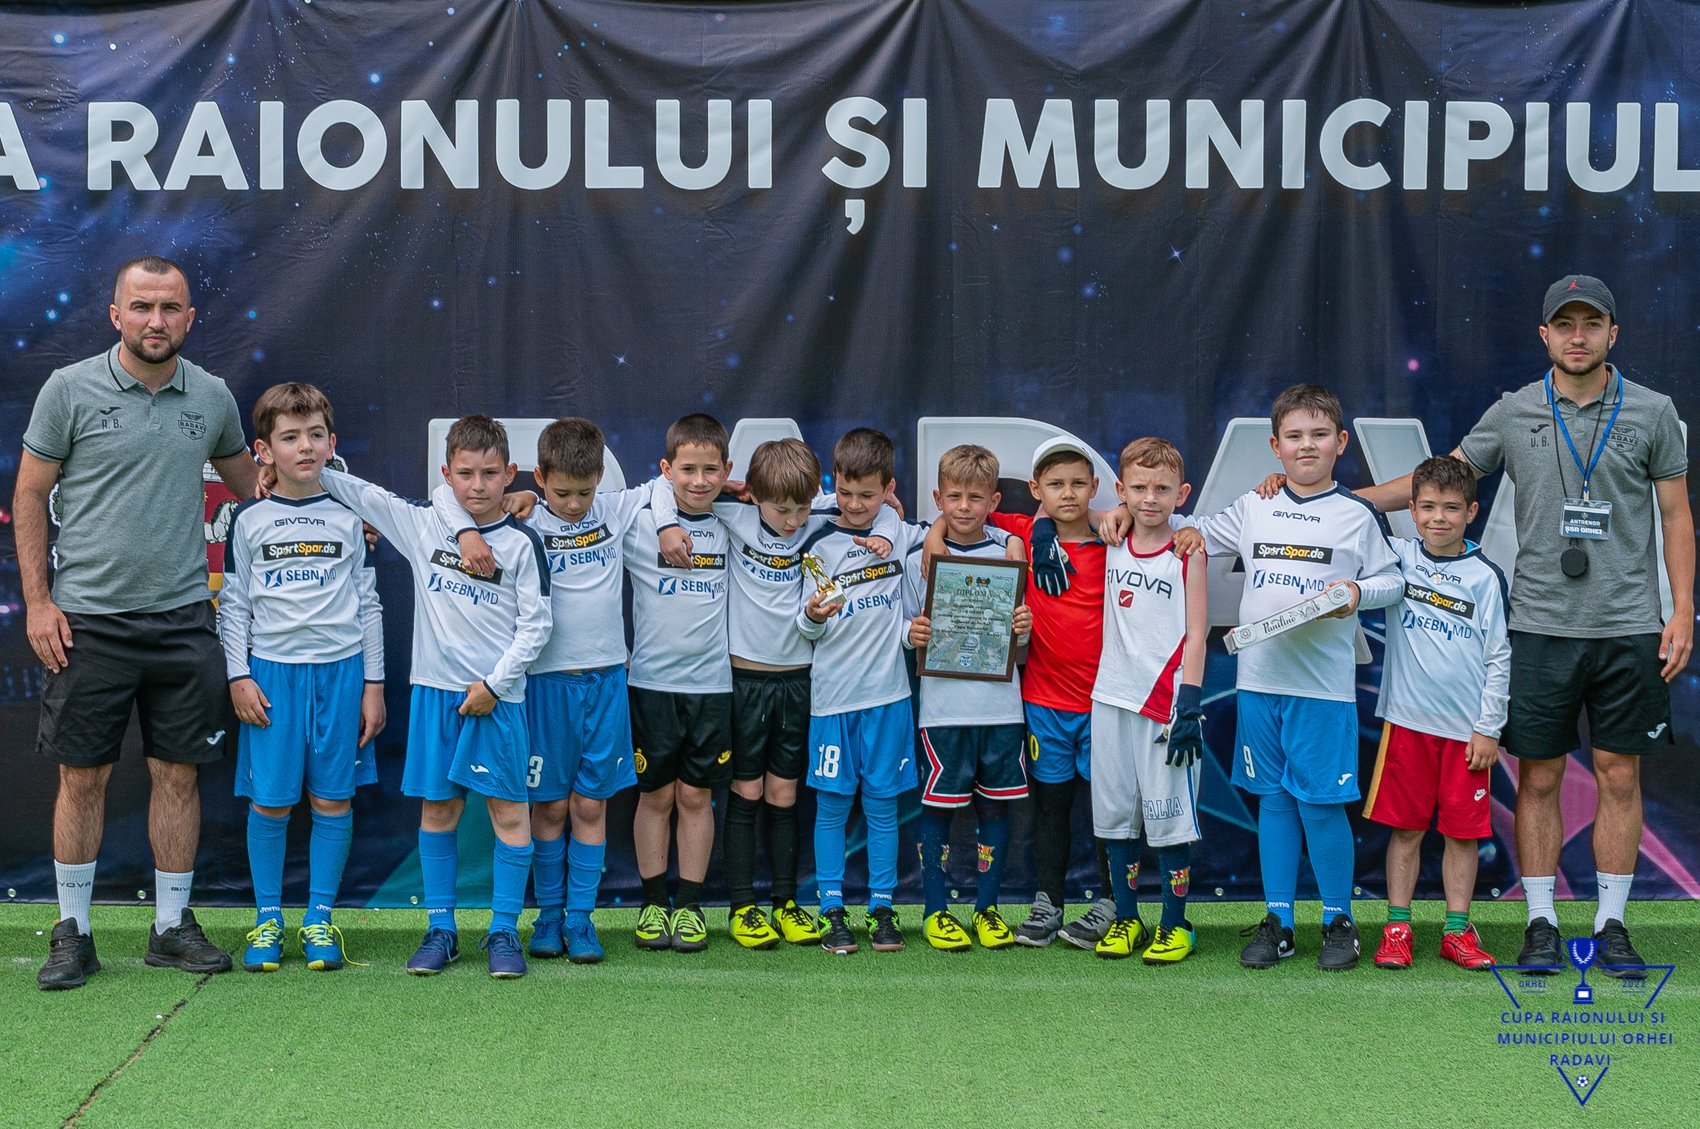 Support for the junior football team from Orhei – SEBN MD